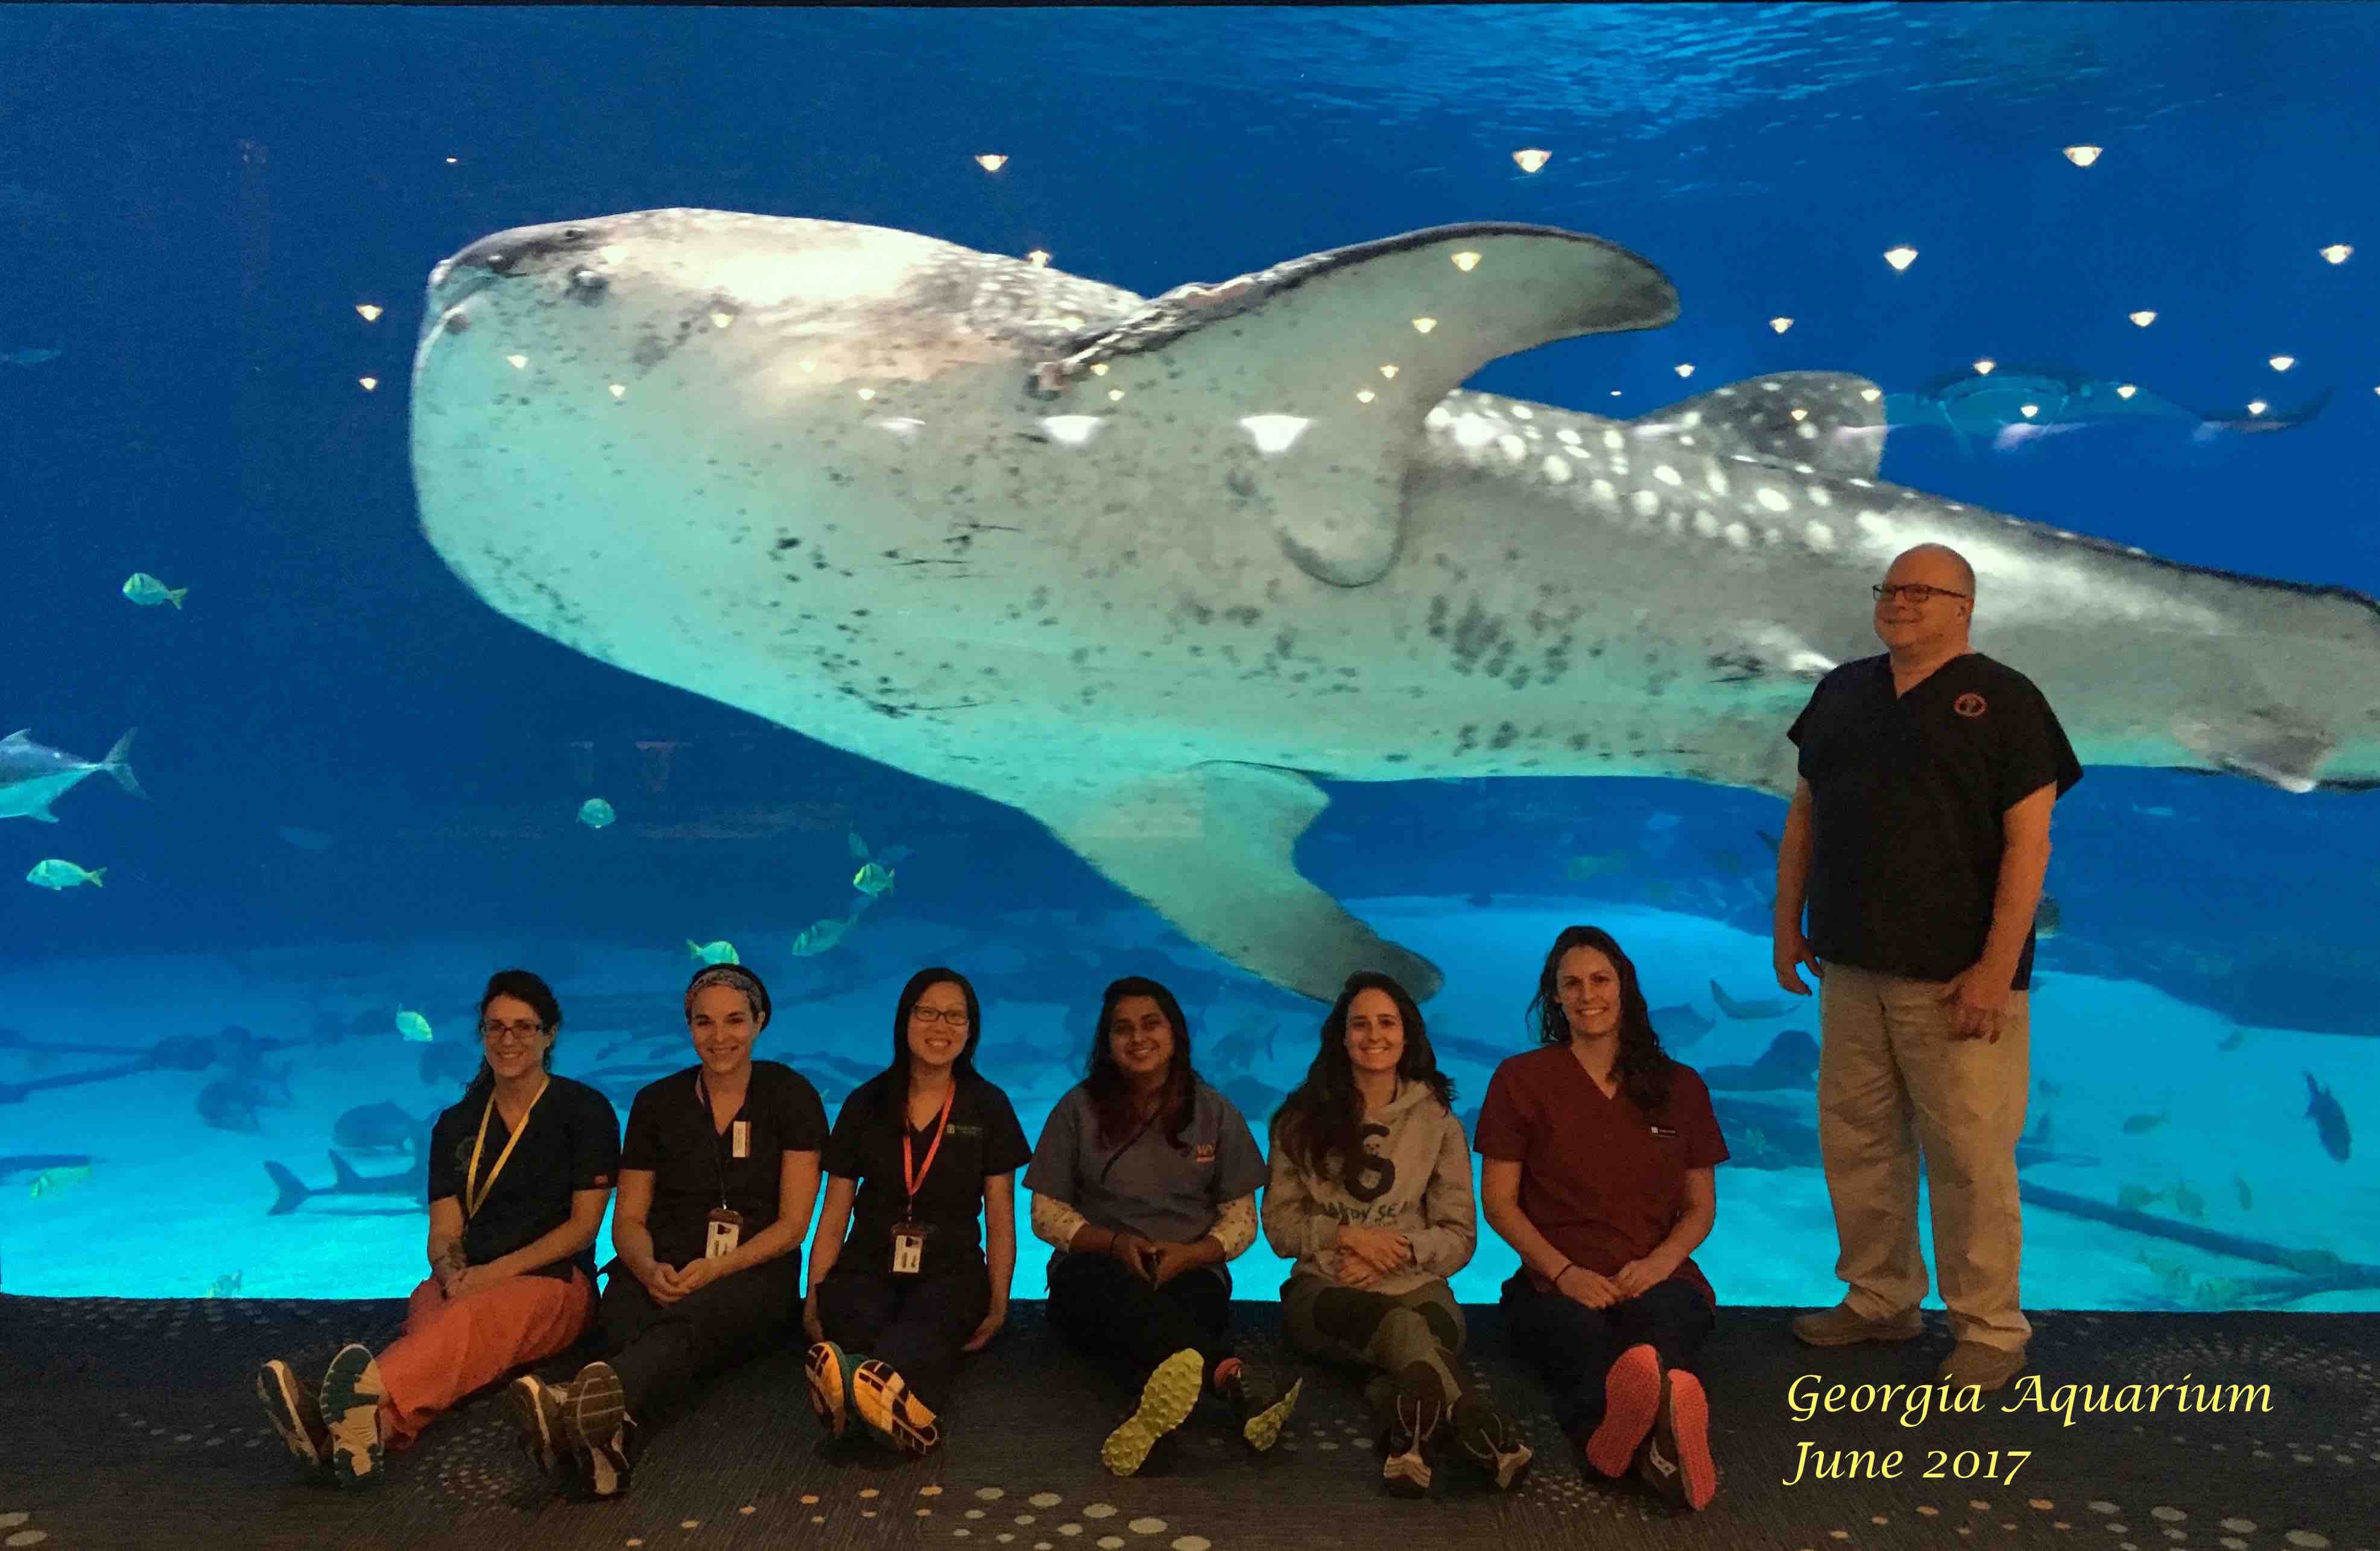 Students in front of large sea creature